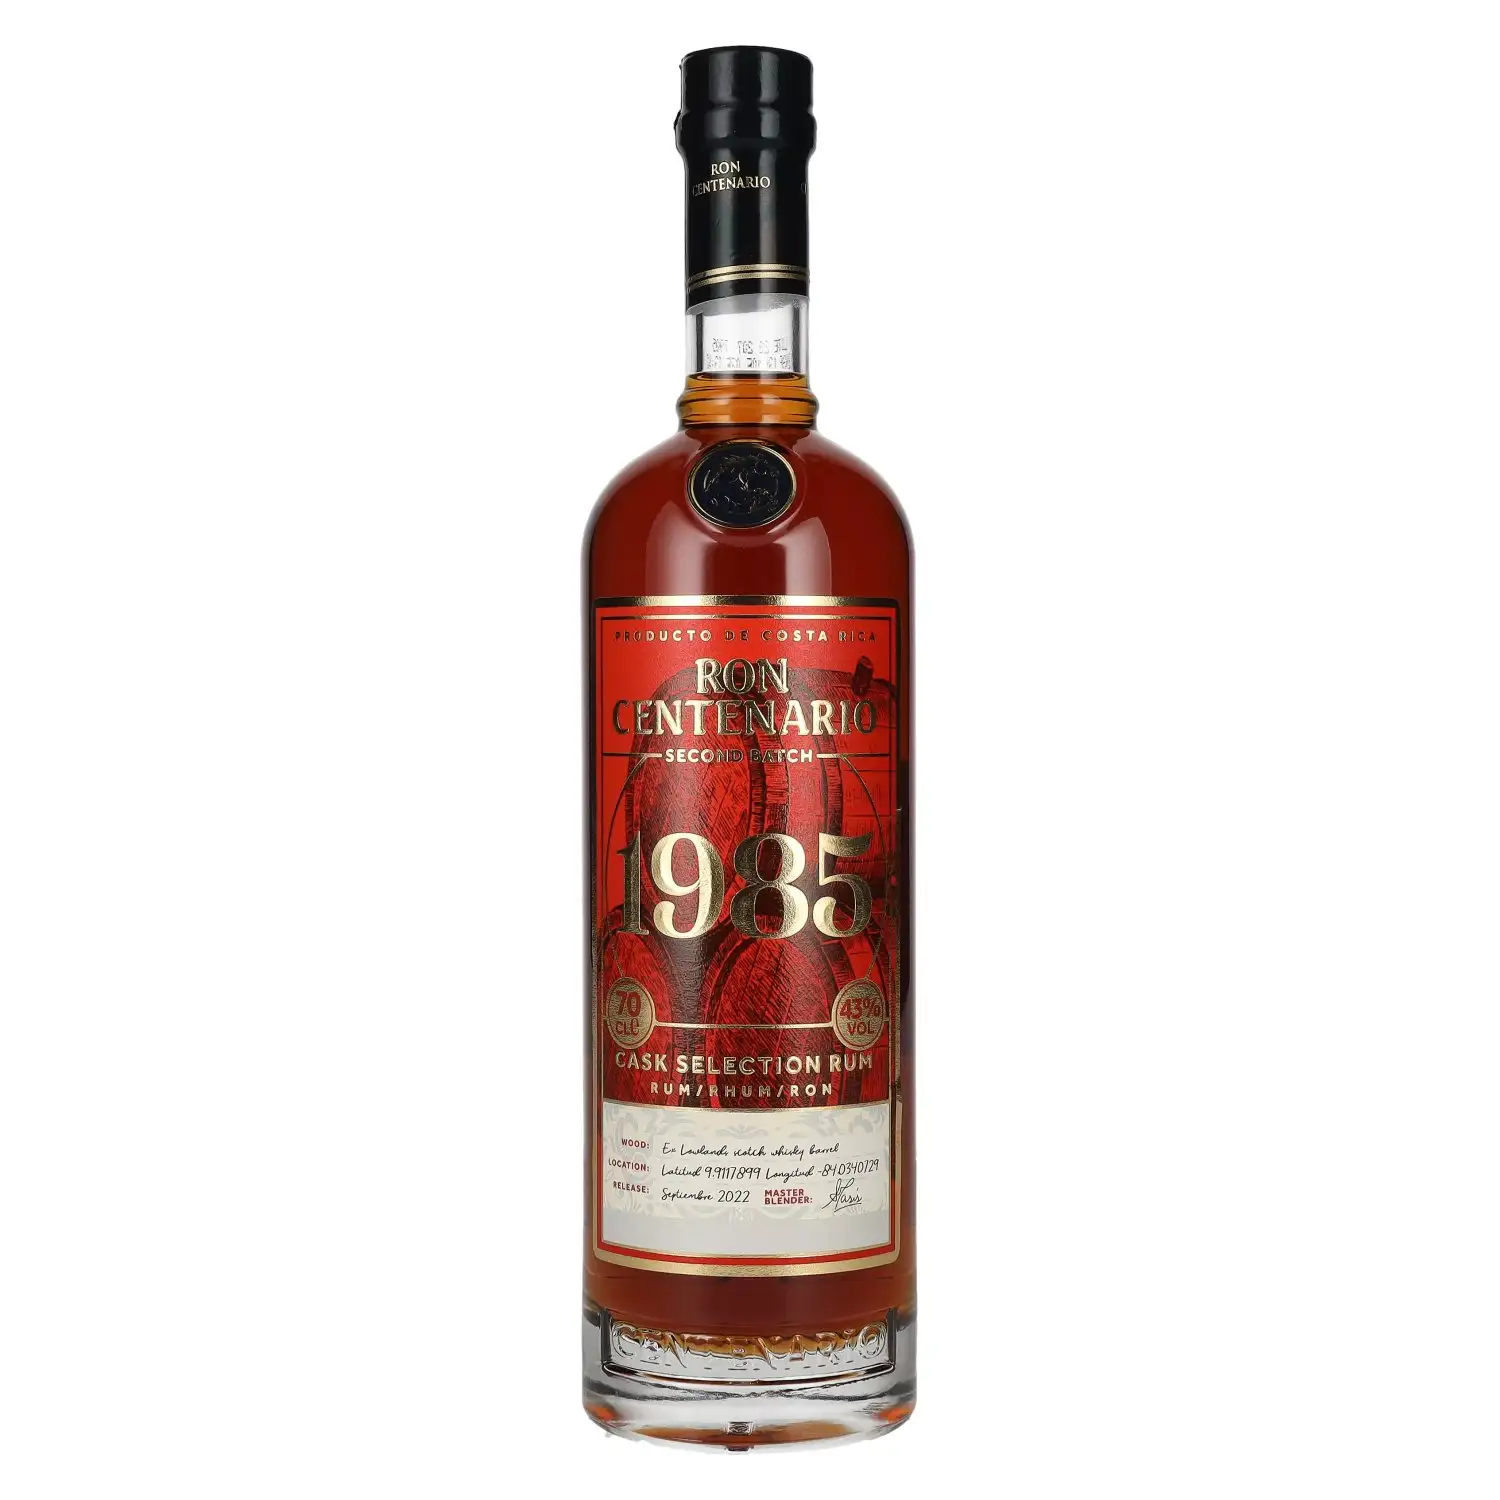 Image of the front of the bottle of the rum Centenario 1985 Cask Selection (Second Batch)